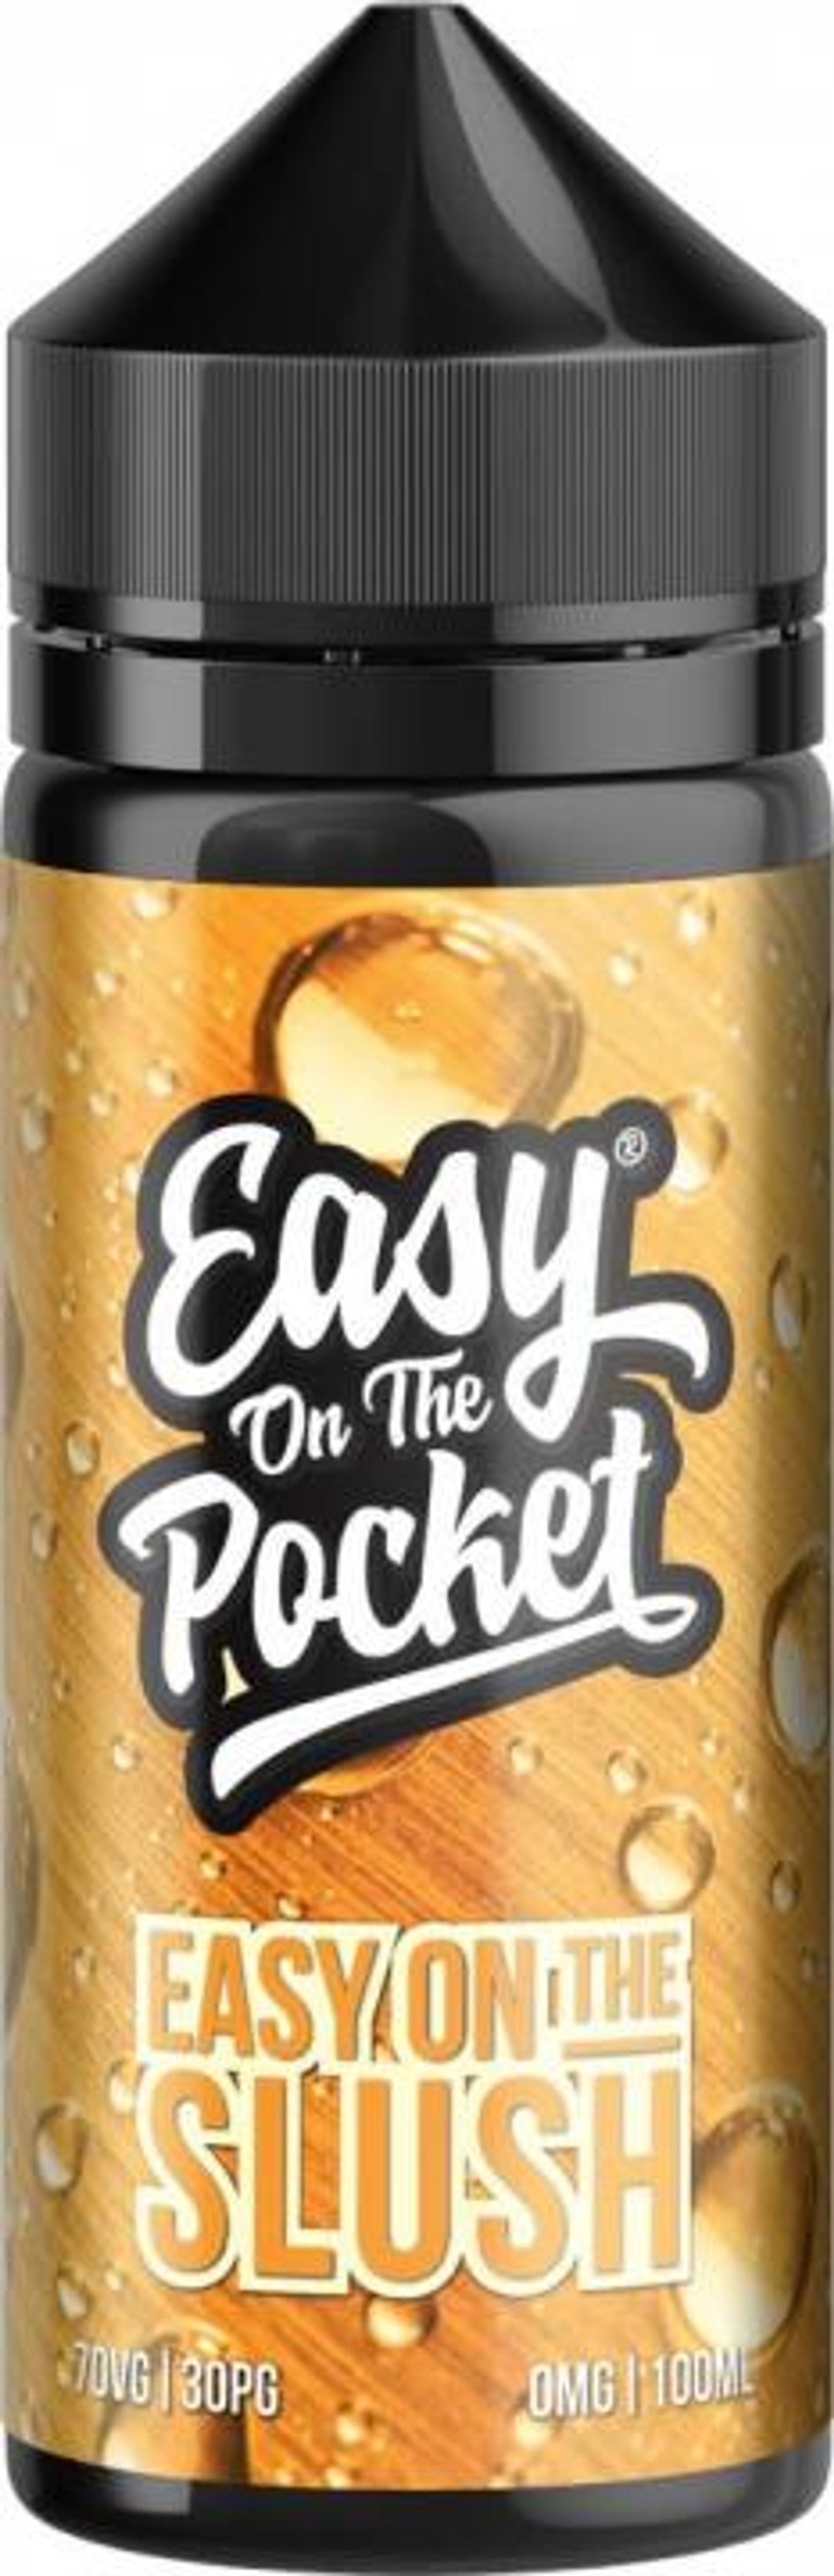 Image of Easy On The Slush by Easy On The Pocket